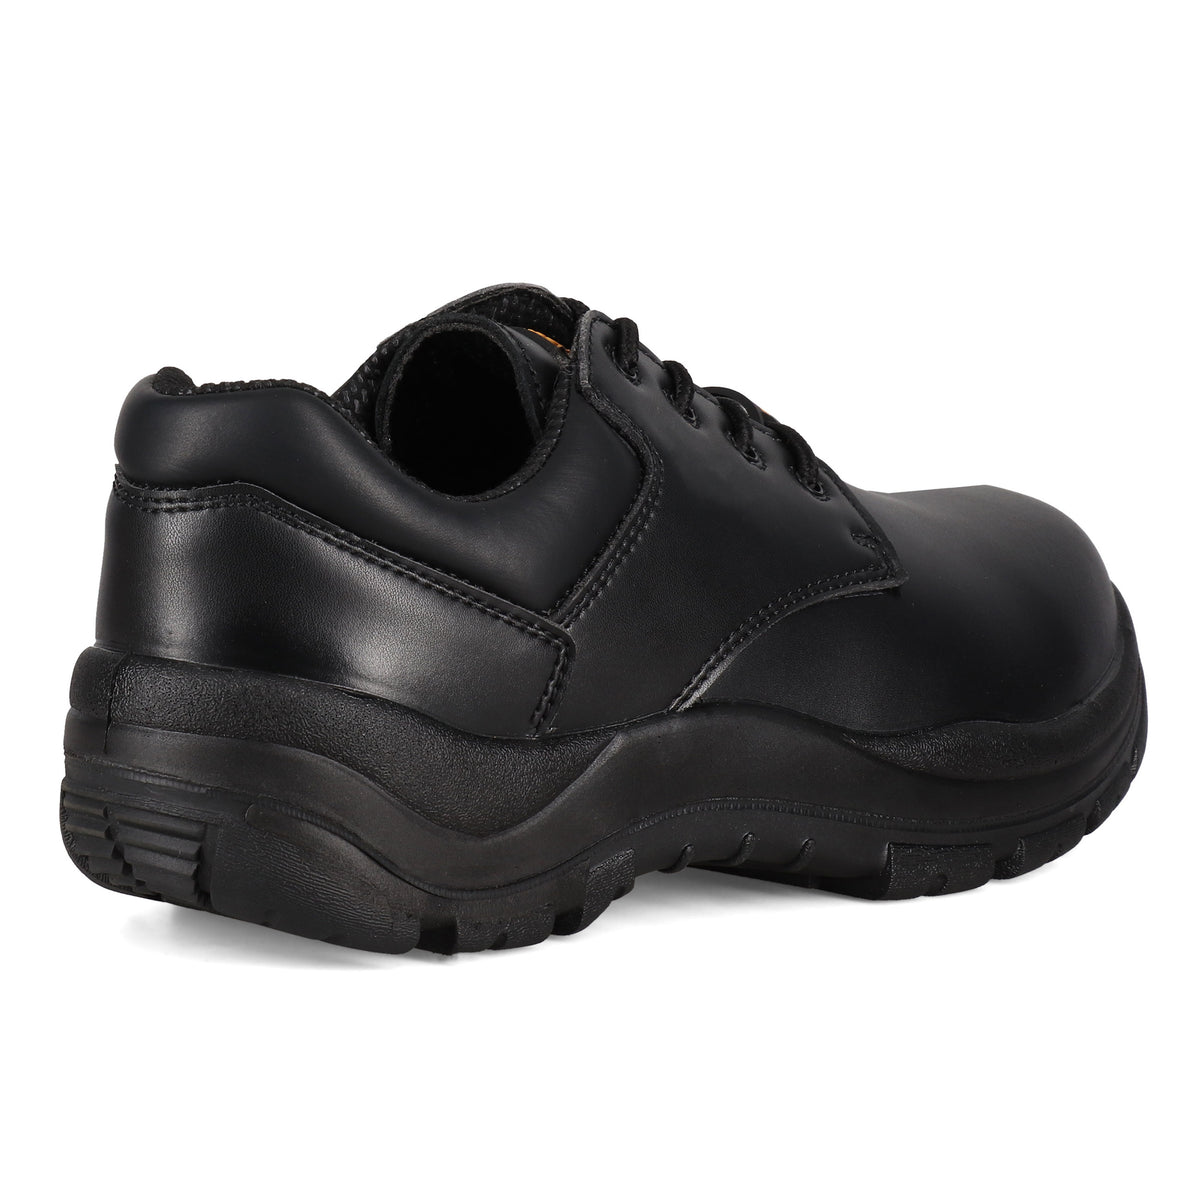 Prospector Work Boots Panther Black Shoes